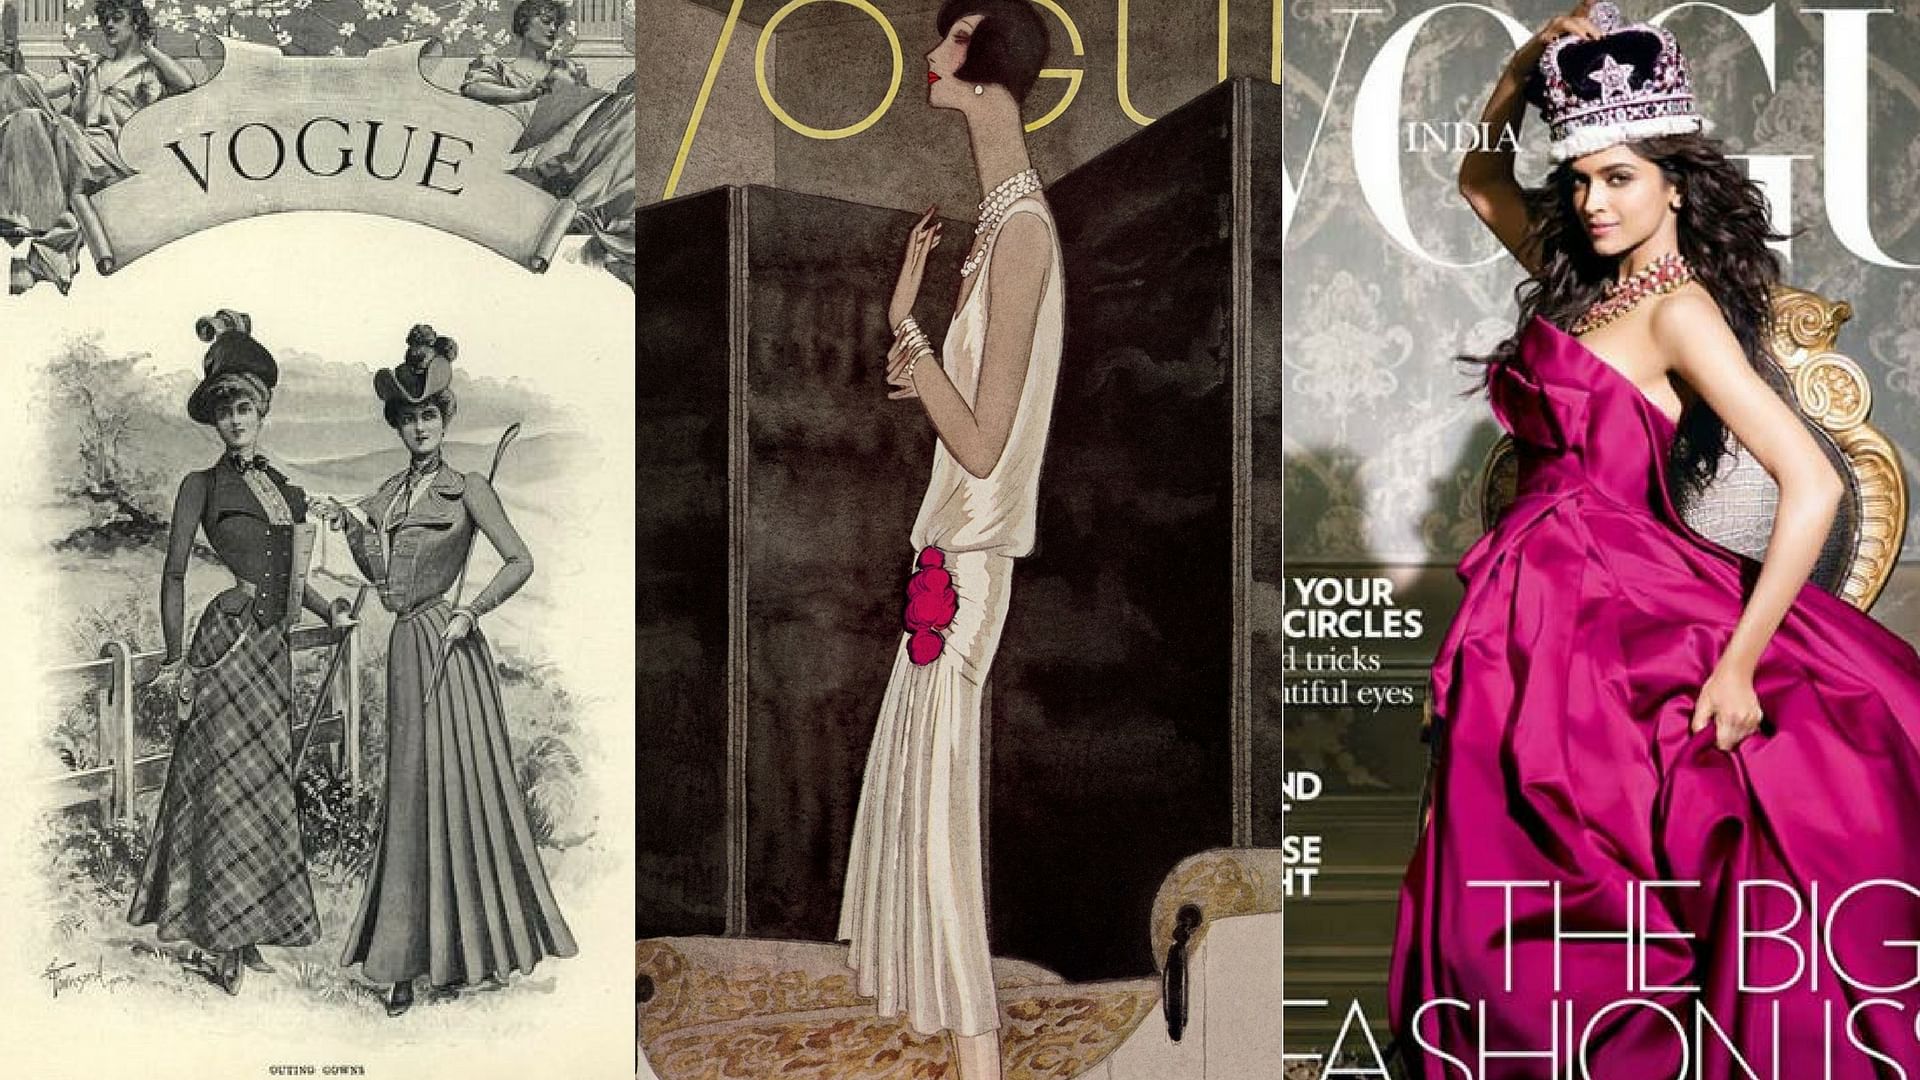 Between then and now, ‘Vogue’ has changed many colours and covers.